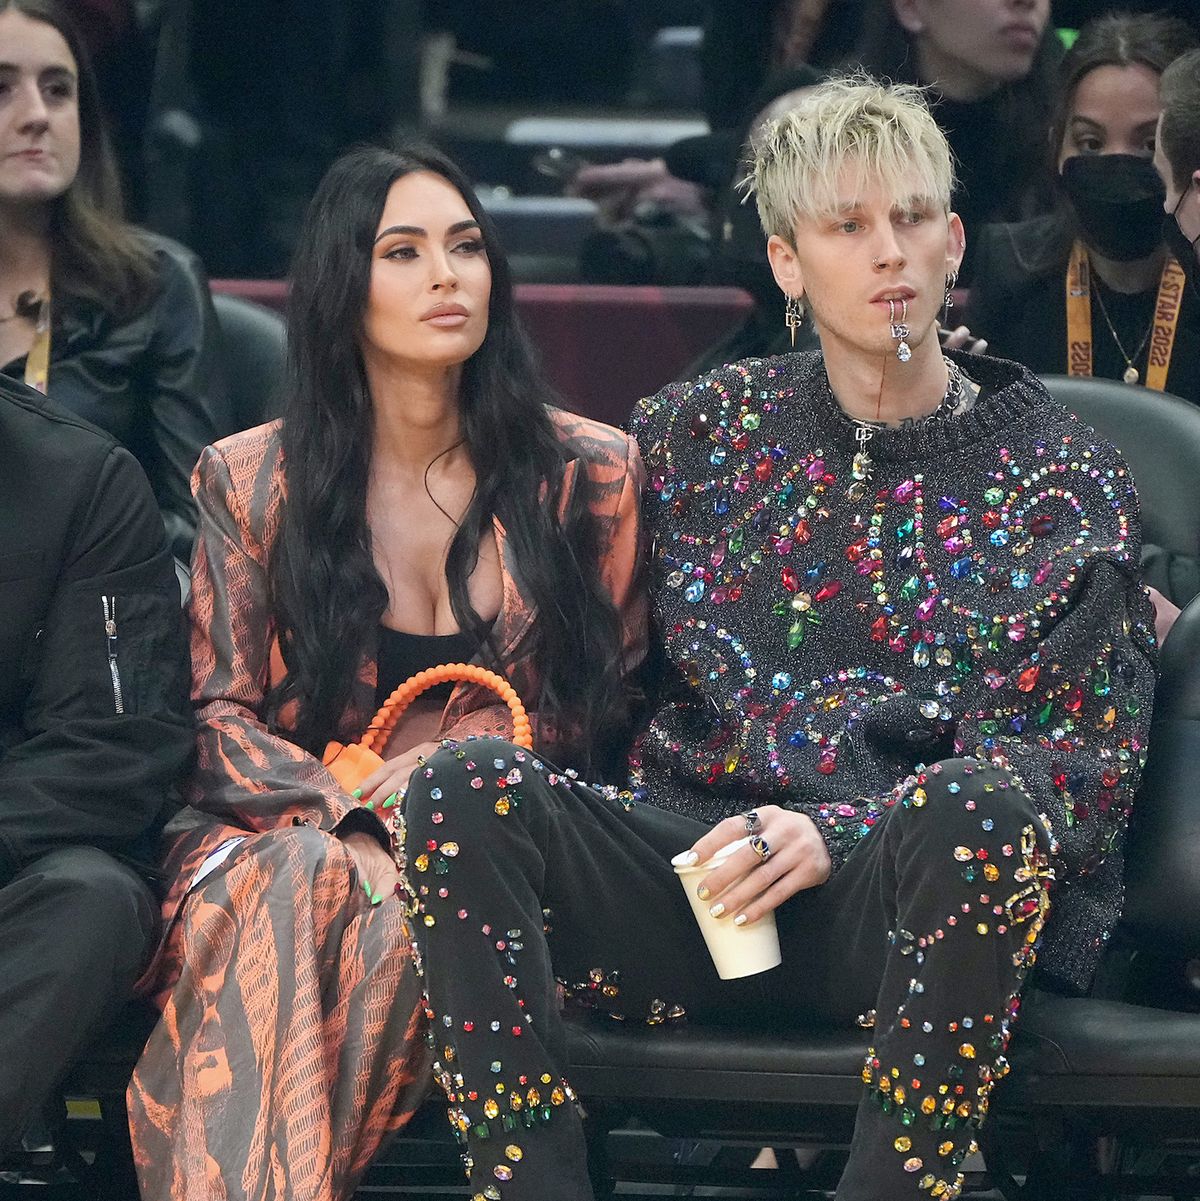 See Megan Fox Pair Her Bold Pantsuit With a Bra for the NBA All-Star Game